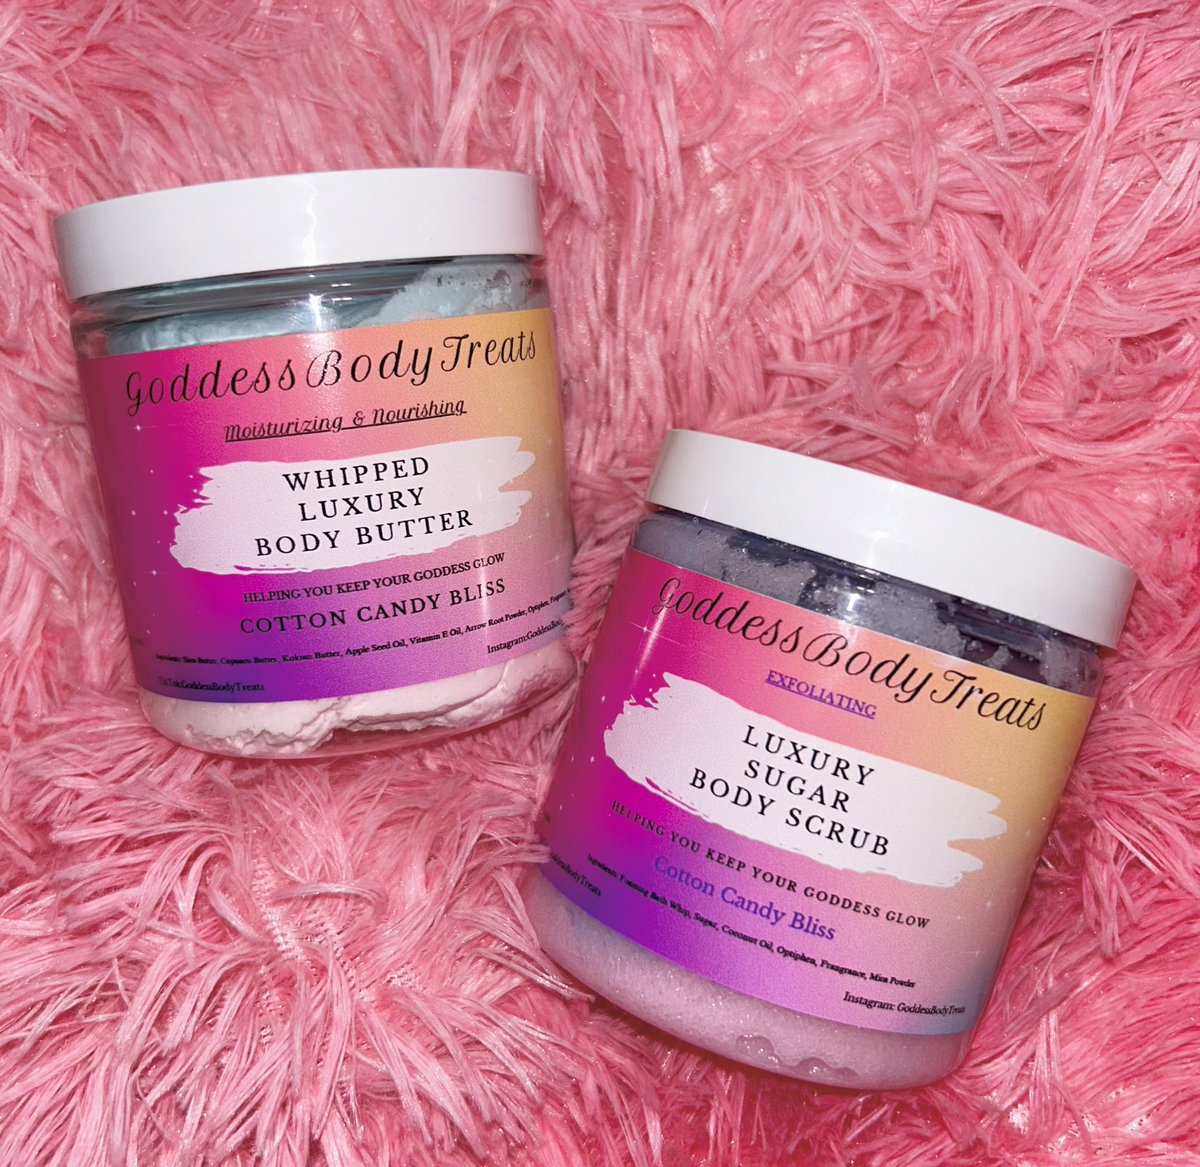 Cotton Candy Bliss Luxury Body Scrub and Luxury Body Butter available soon!
Feel the Goodness 👸🏽🍬
#BodyButter #SkinCare #Natural #GoddessBodyTreats